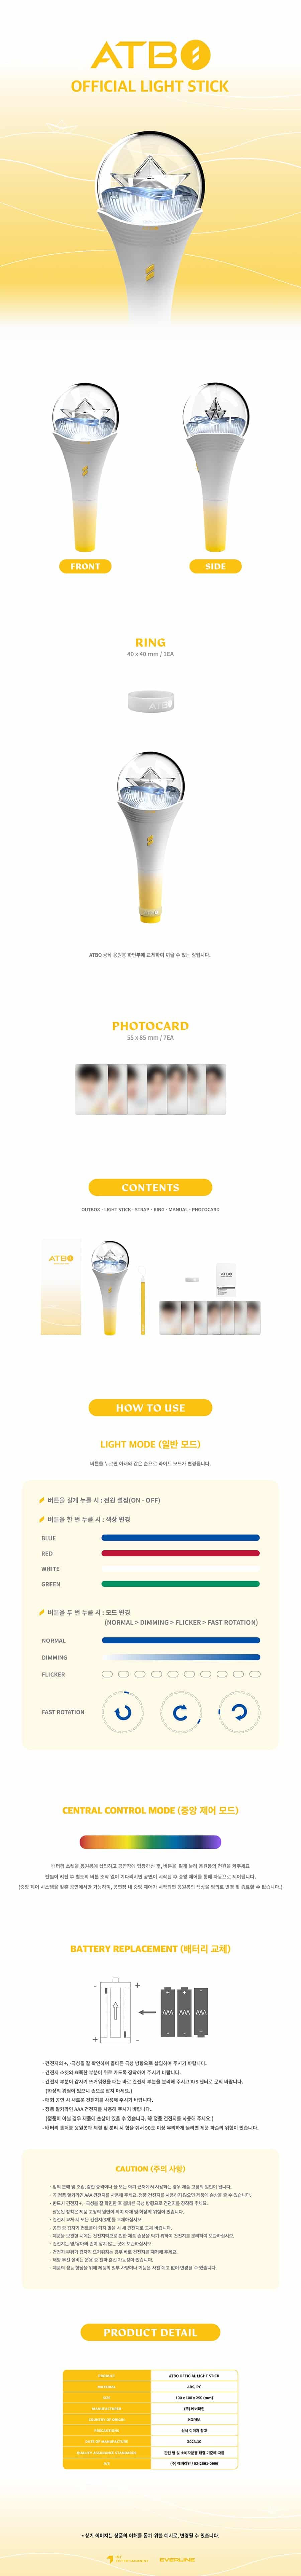 atbo-official-light-stick-wholesales